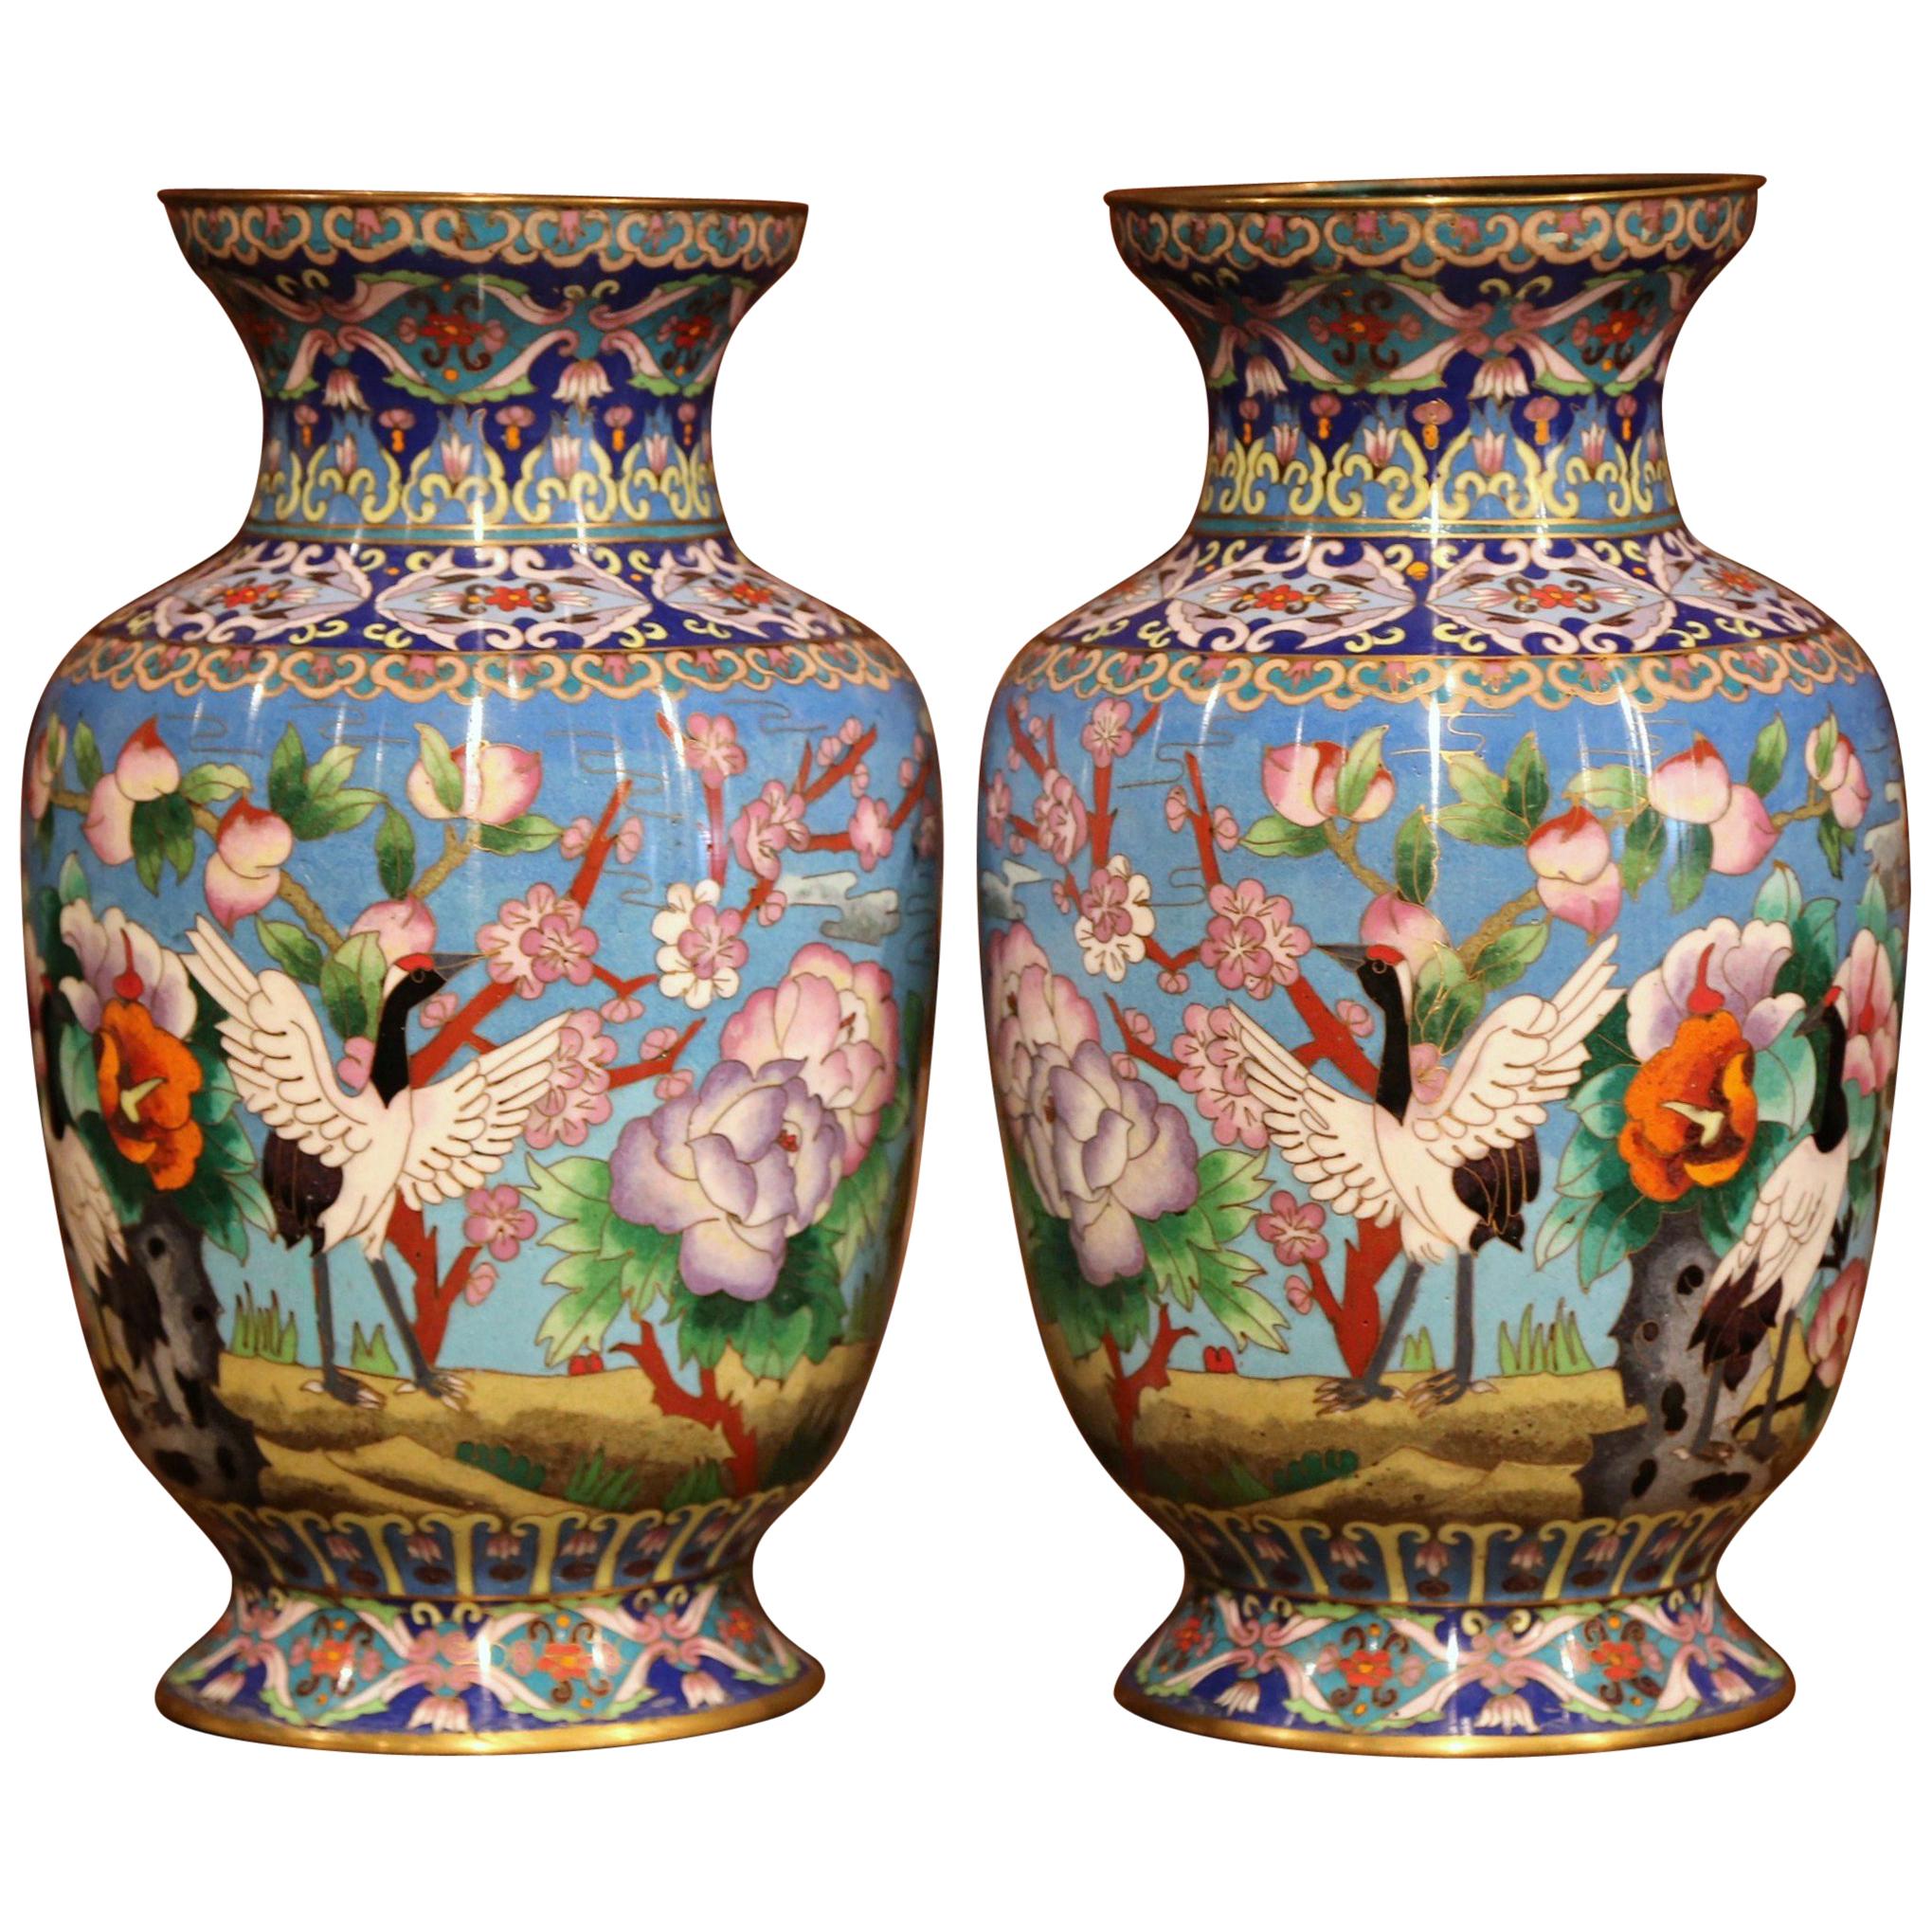 Pair of Mid-20th Century Chinese Cloisonné Vases with Bird and Floral Decor